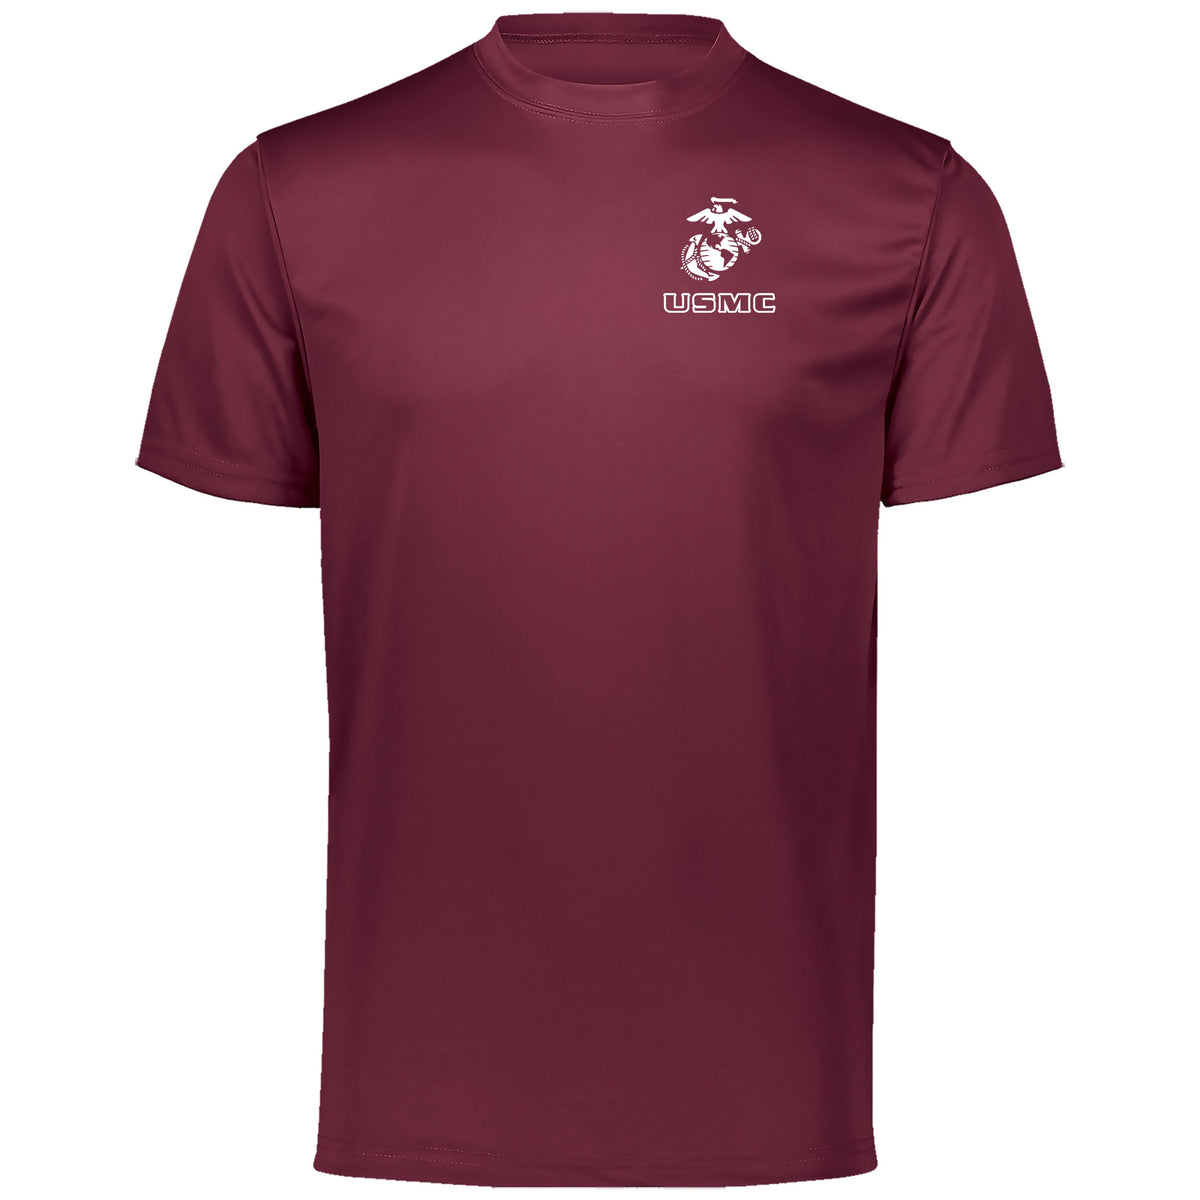 Closeout Maroon USMC Chest Seal Performance Tee